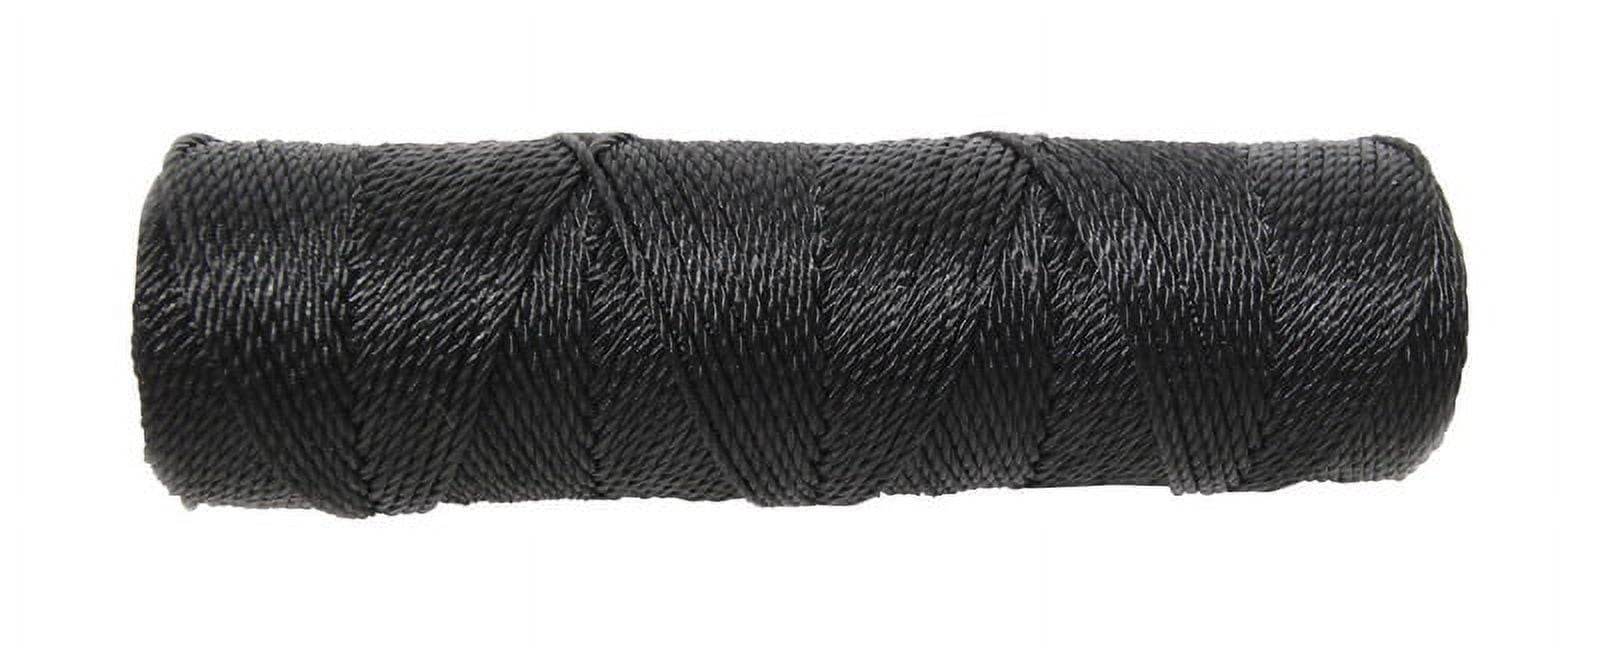 Natural Twisted Nylon Twine - Brownell Twines